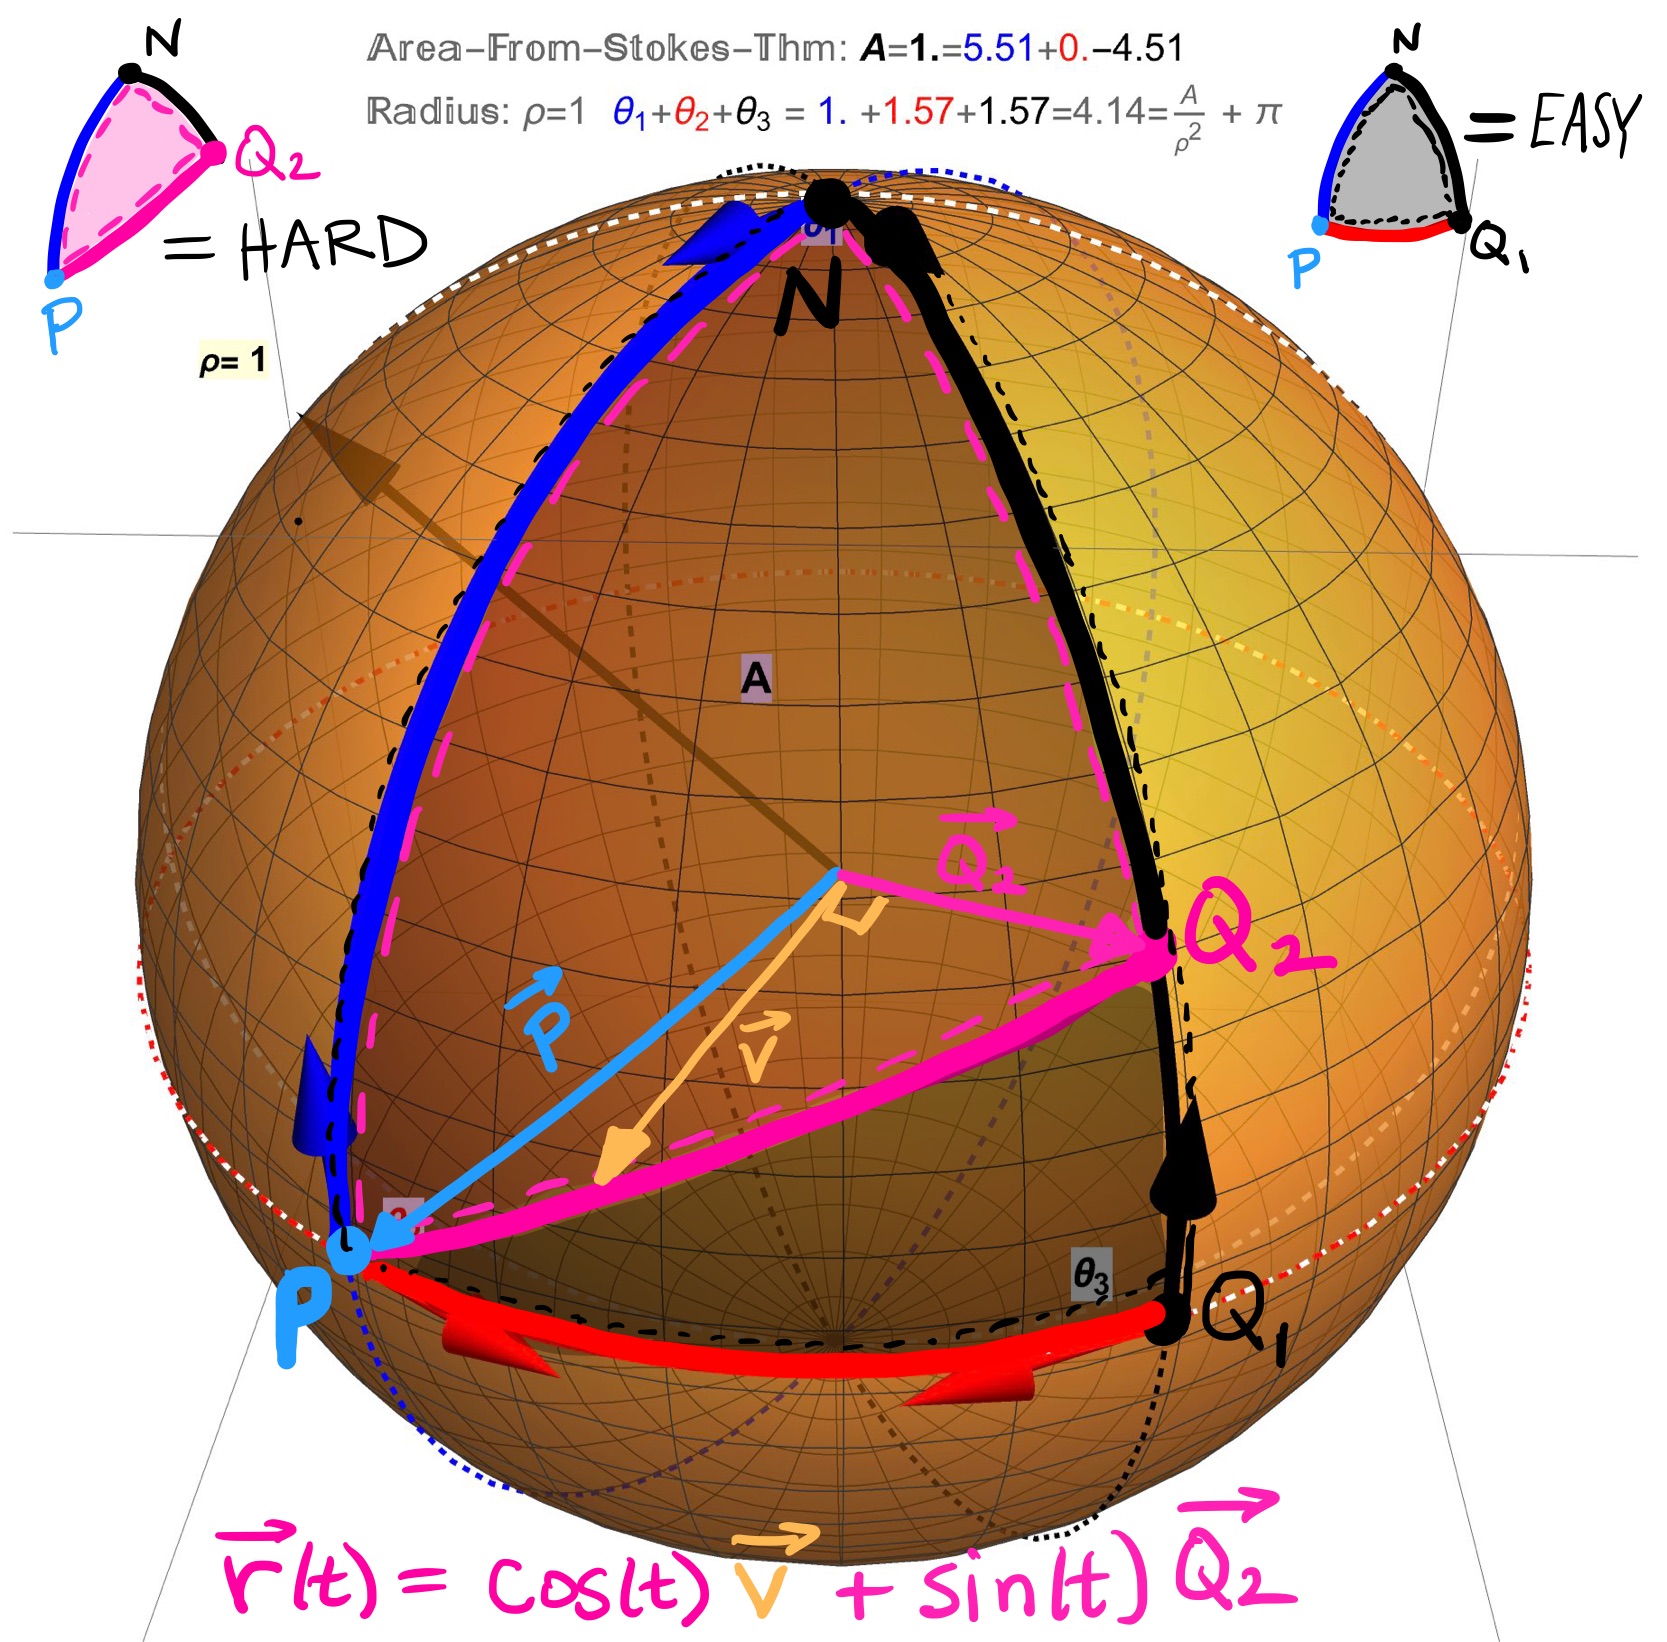 Computational Complexity: Computing area of a geodesic triangle with one edge being the great circle between the two points \(P\) and \(Q_{2}\) parameterized by \(r(t)=\cos(t)\overrightarrow{v}+\sin(t)\overrightarrow{Q_{2}}\) is computationally intensive for a couple of reasons, not least of which being that the upper parameter \(\#\) of the interval \(t=\pi/2 ... \#\) is a not-nice number involving an inverse trig function. For these parametrization reasons, we go back to the drawing board to come up with a better method for describing and computing the area of a geodesic triangle.